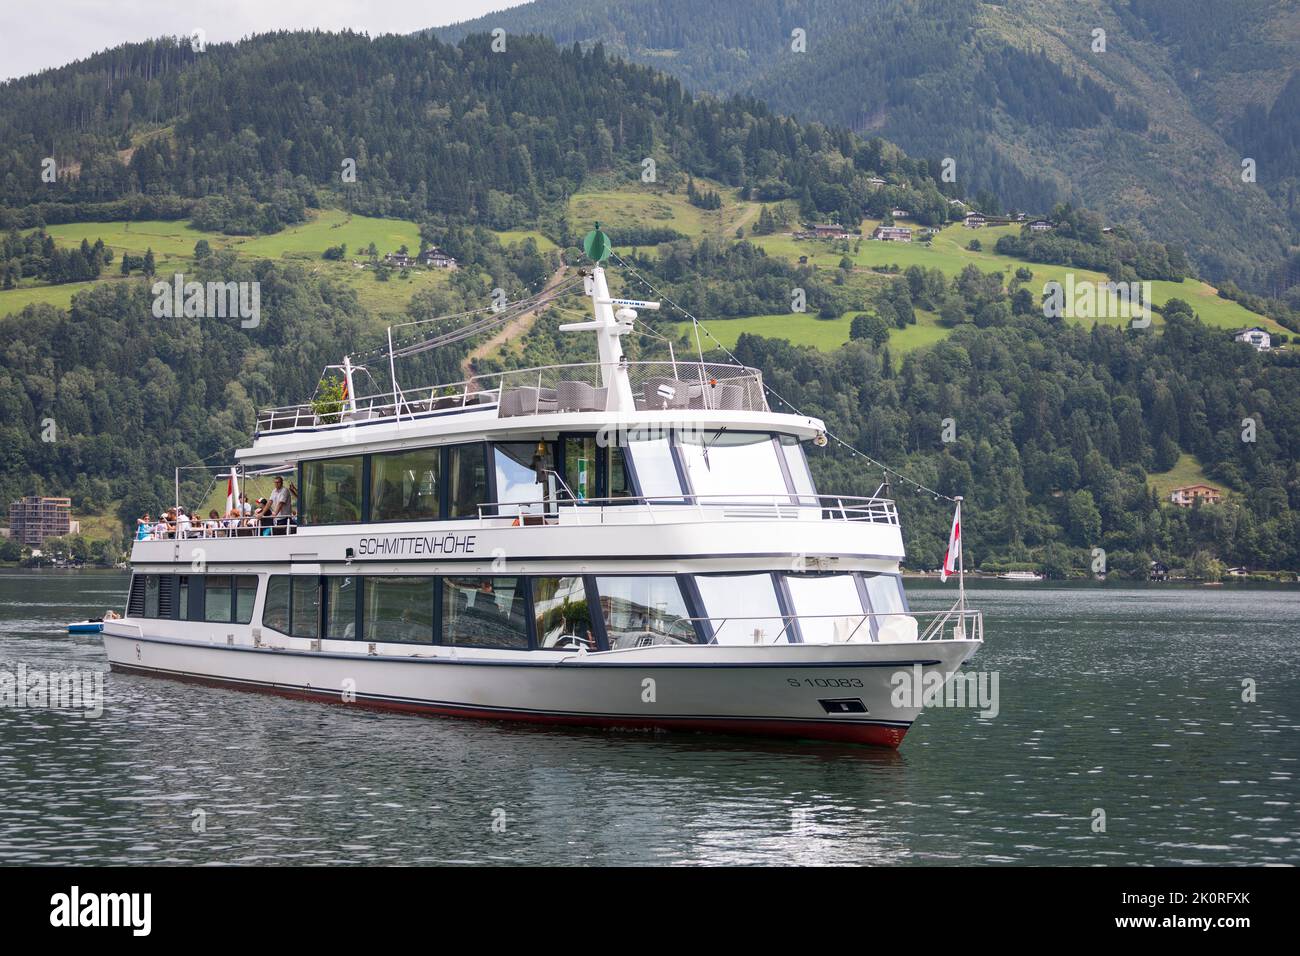 Sightseeing boat with passengers arriving at harbor Zell am See, Austria Stock Photo